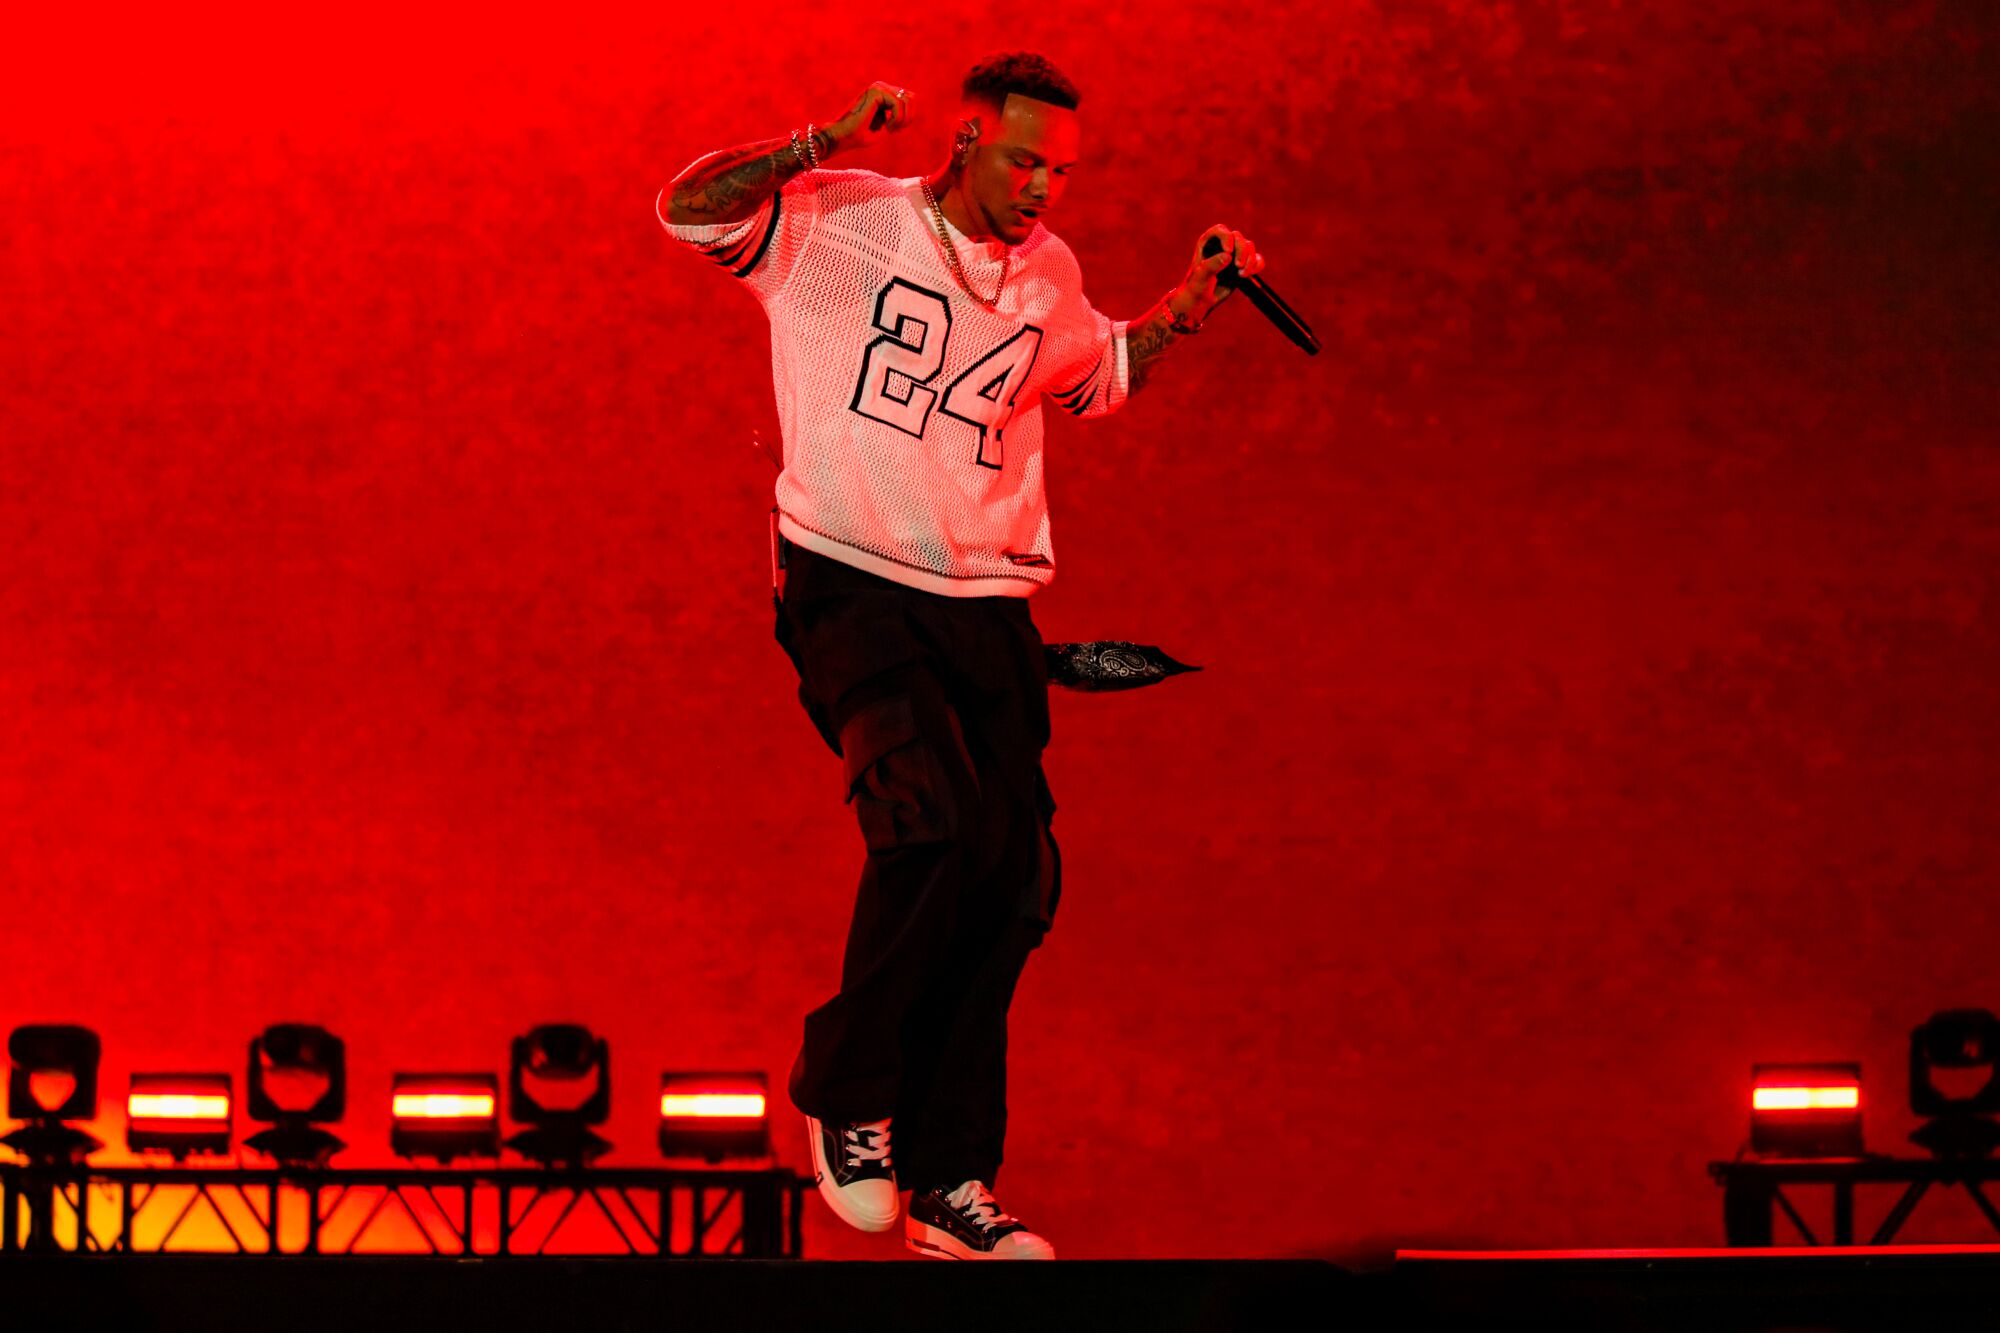 A man in a sports jersey and dark pants dances in front of a red background on stage.